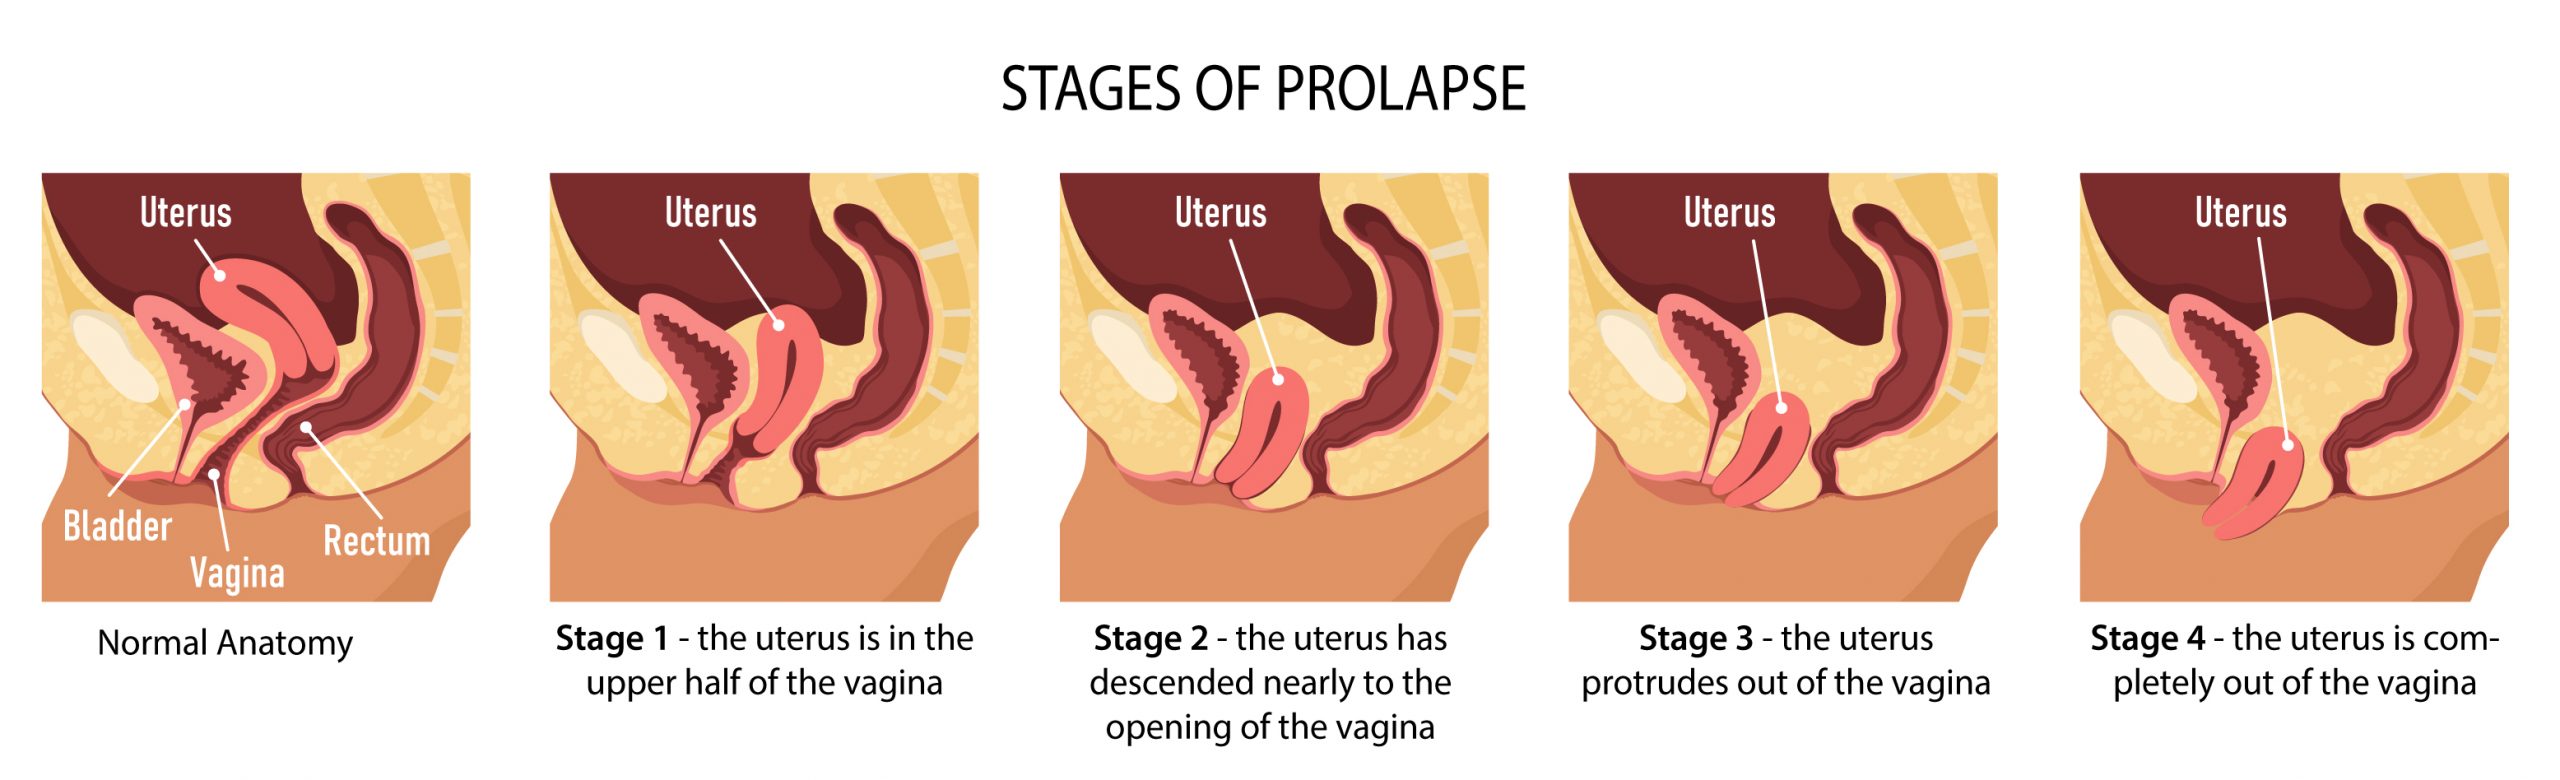 Stages-of-Prolapse-Diagram